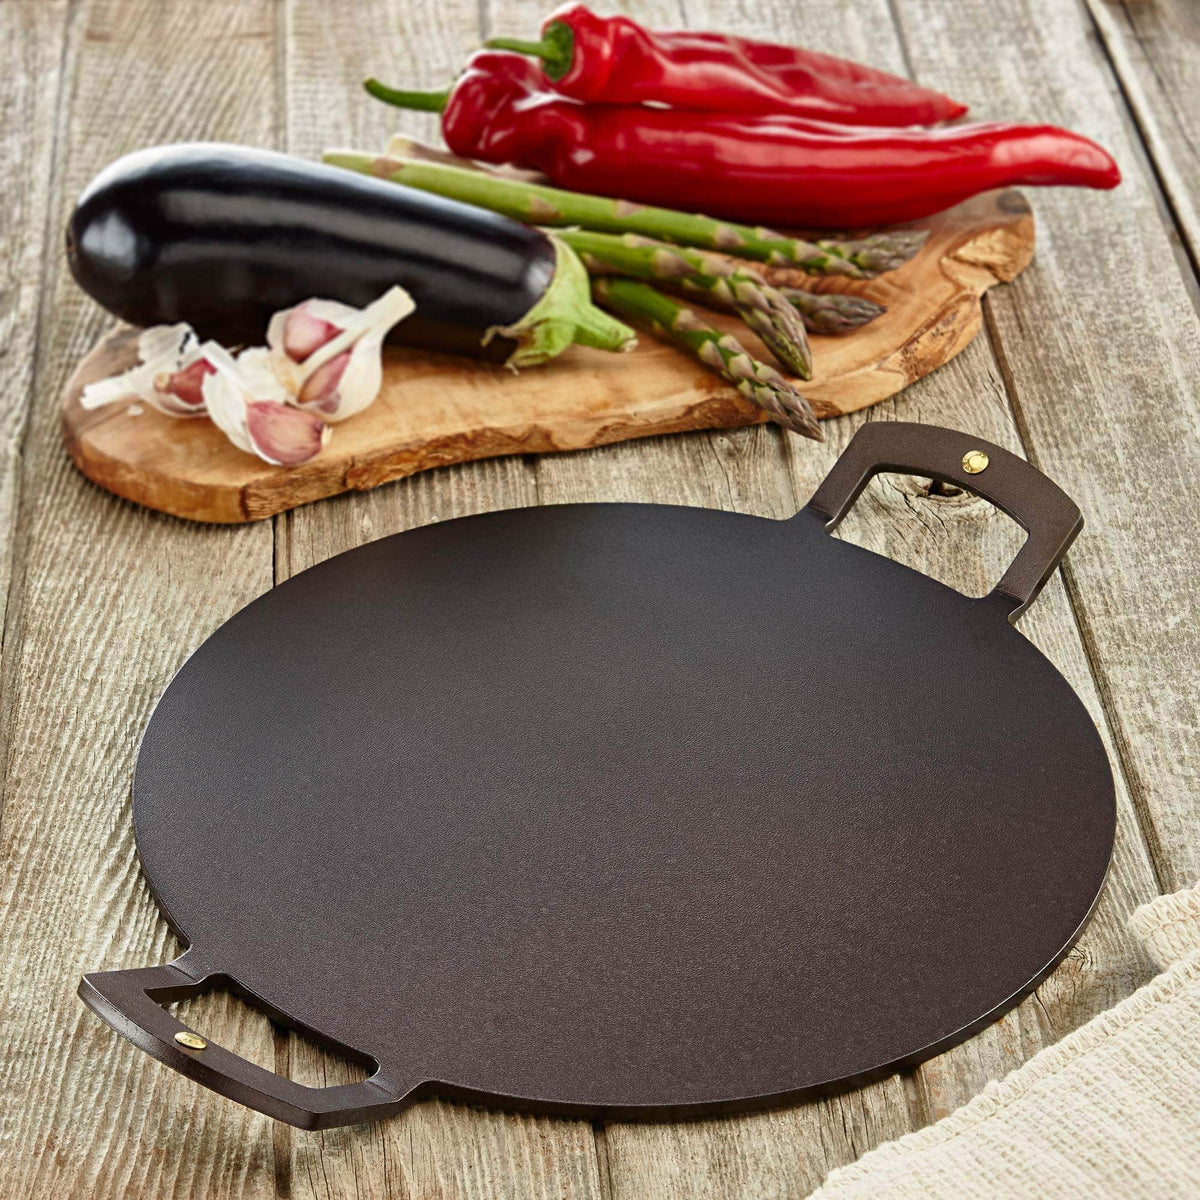 12 inch griddle and baking plate